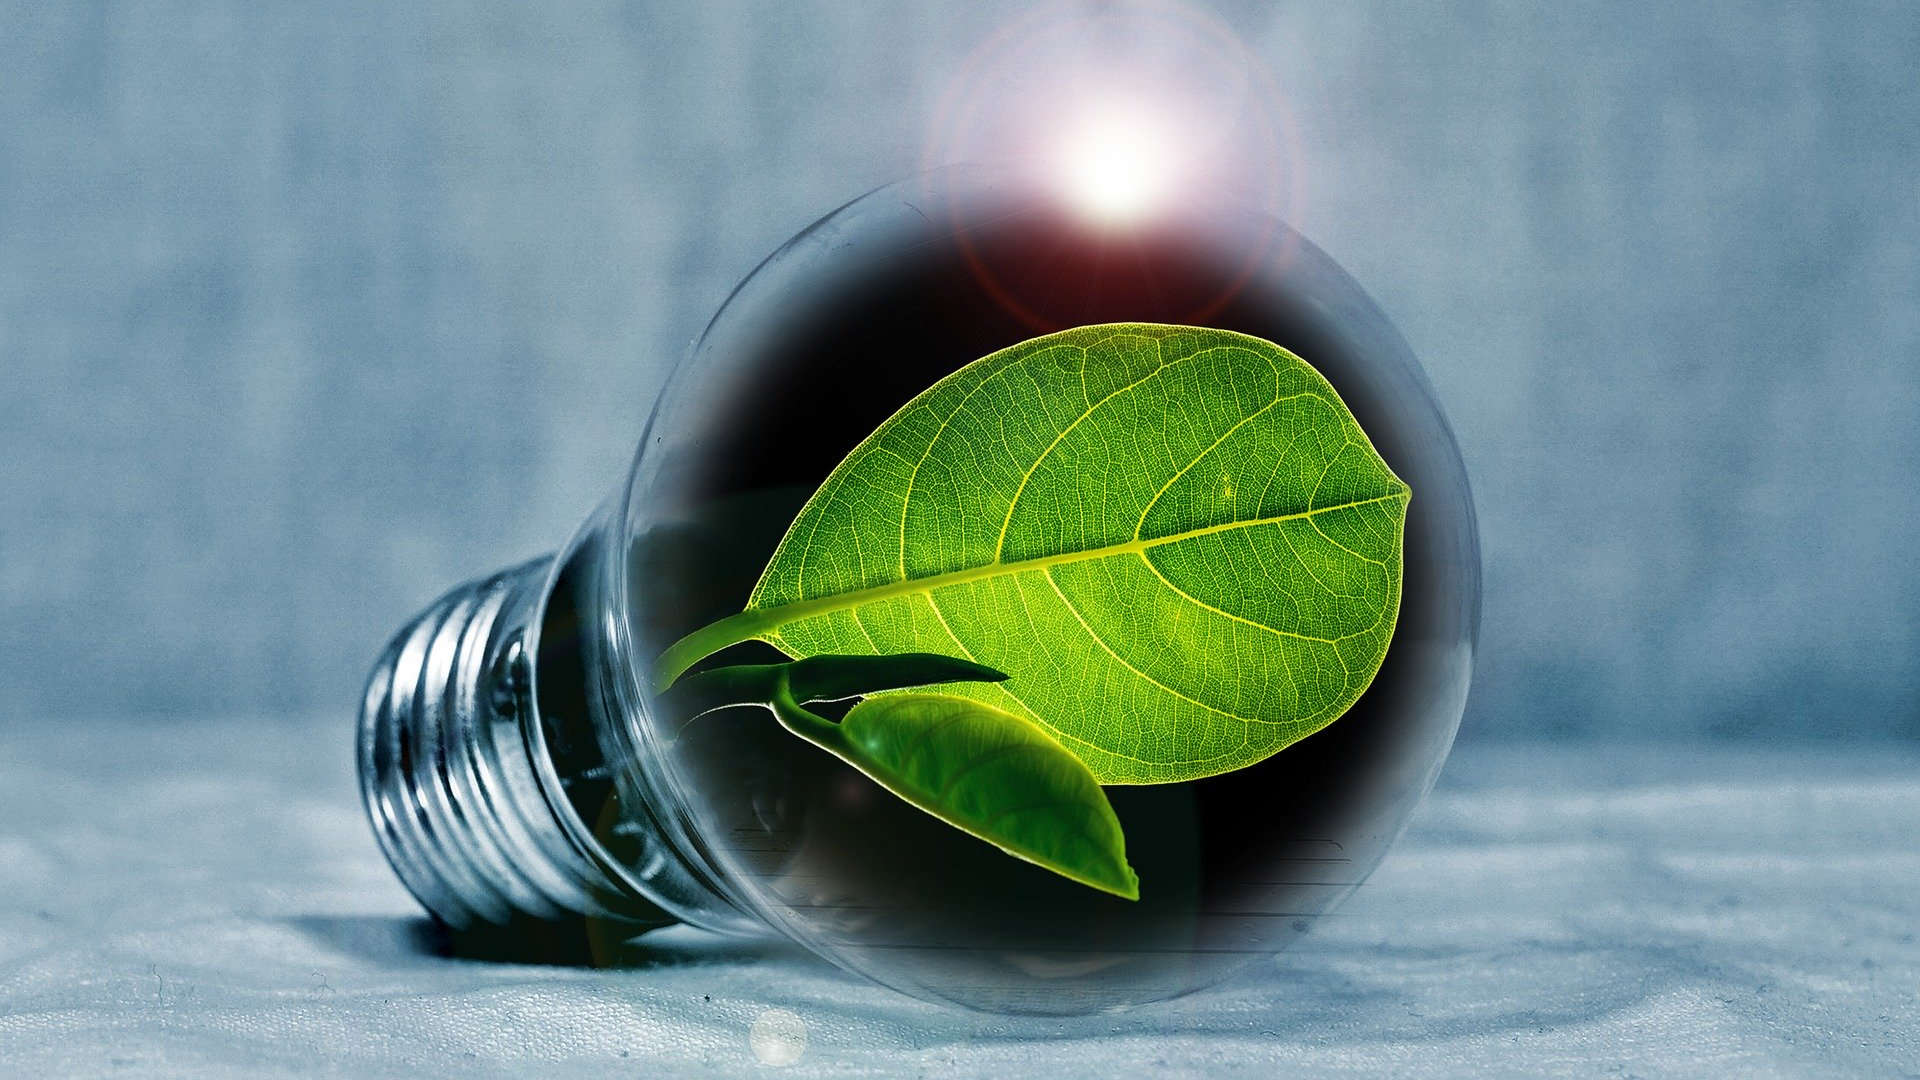 Free energy saving LED light bulbs from the Utility Warehouse are &#39;green&#39; &amp; good for the environment - Join Utility Warehouse (UW)